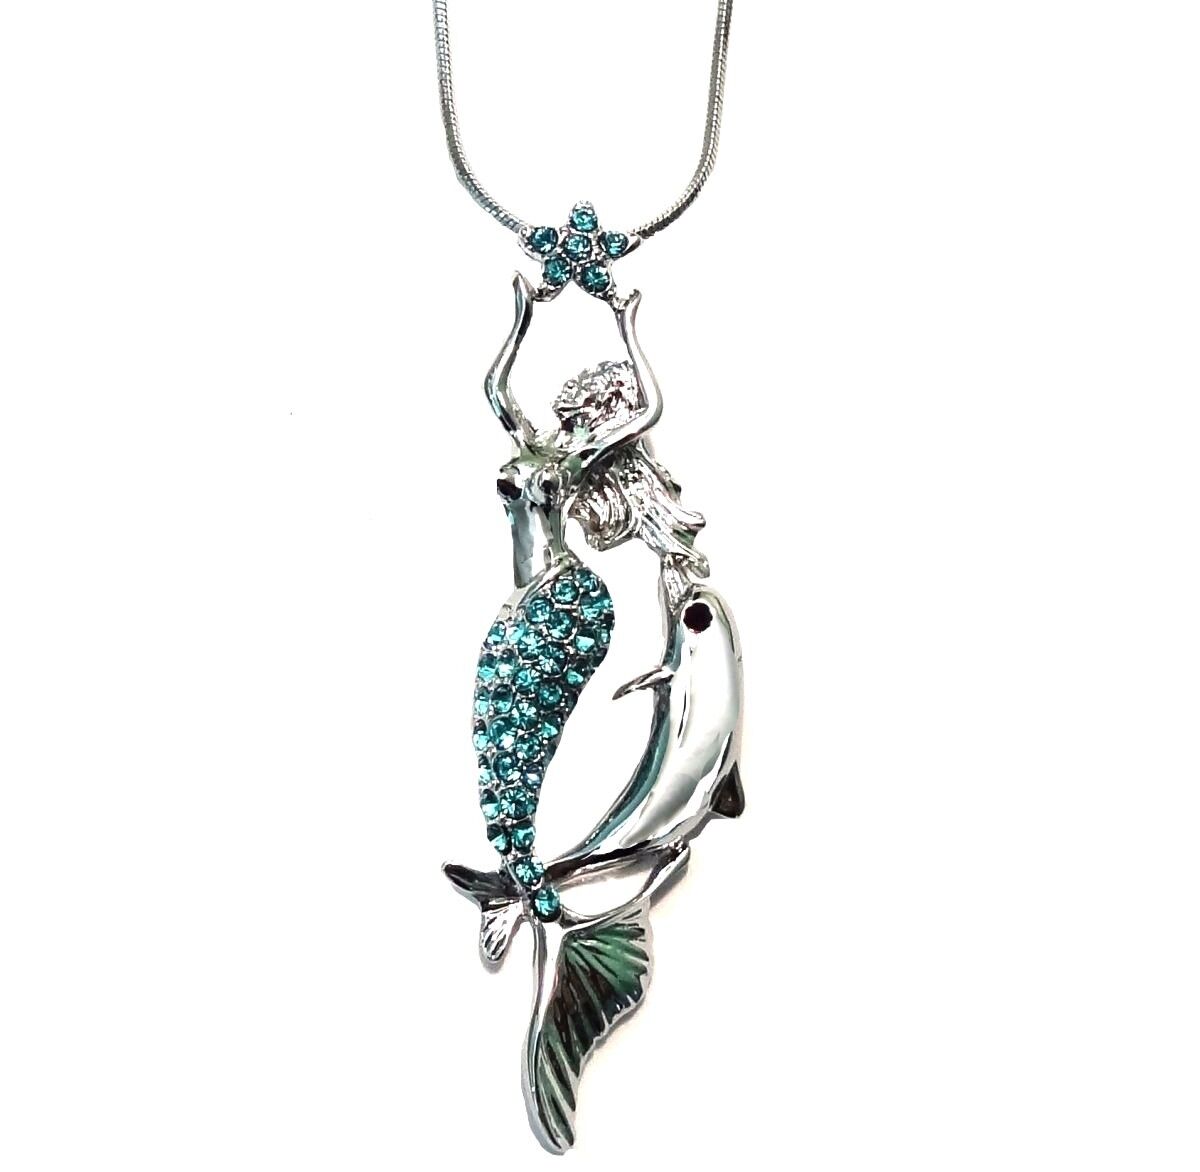 Mermaid Necklace . Fast Shipping !